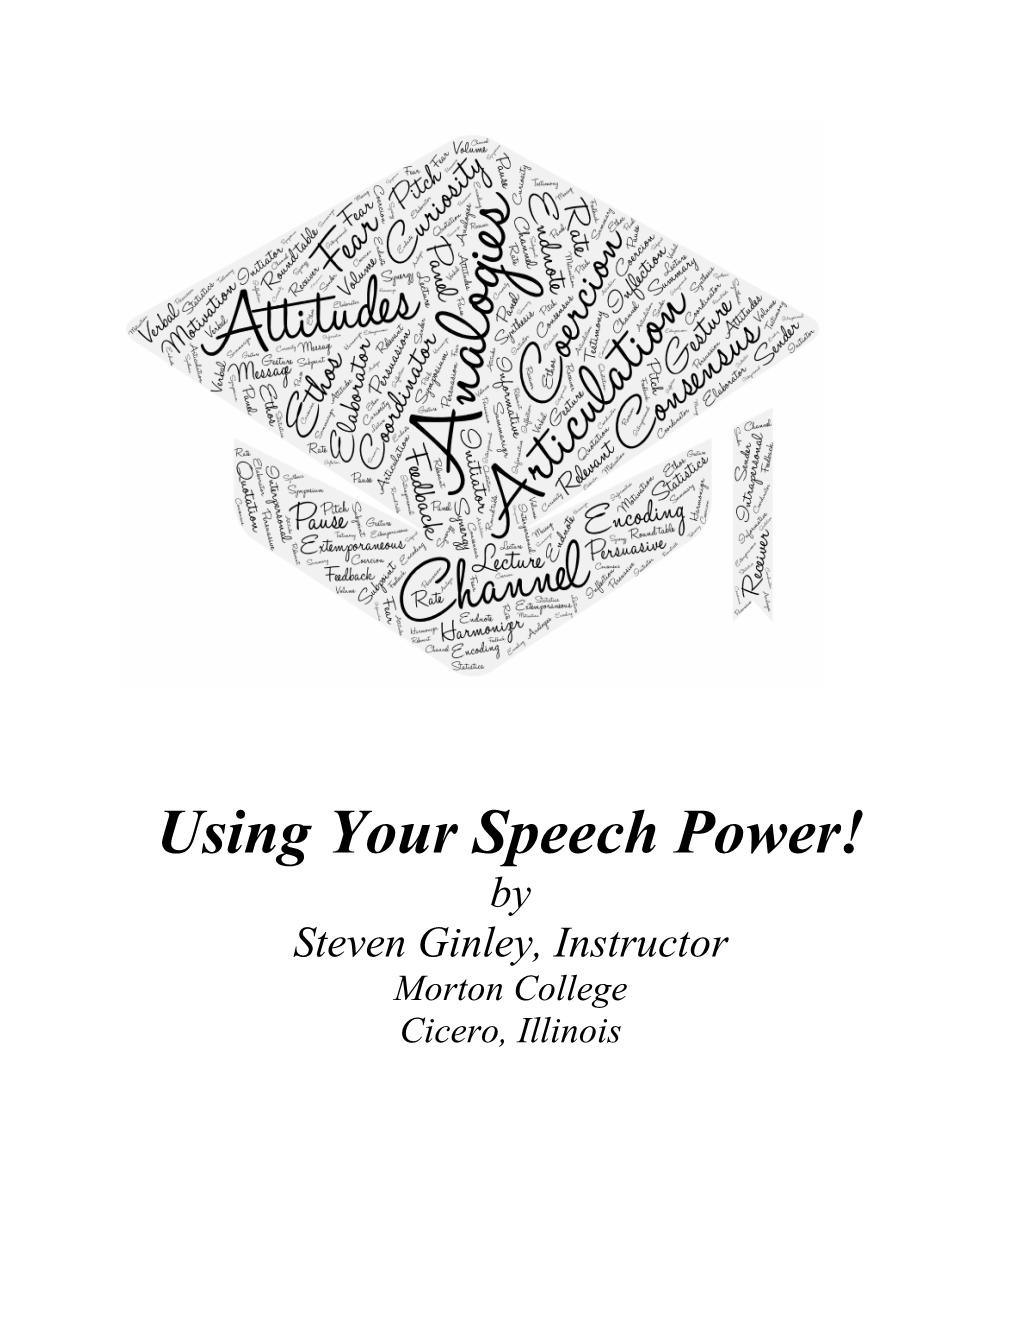 Using Your Speech Power! by Steven Ginley, Instructor Morton College Cicero, Illinois